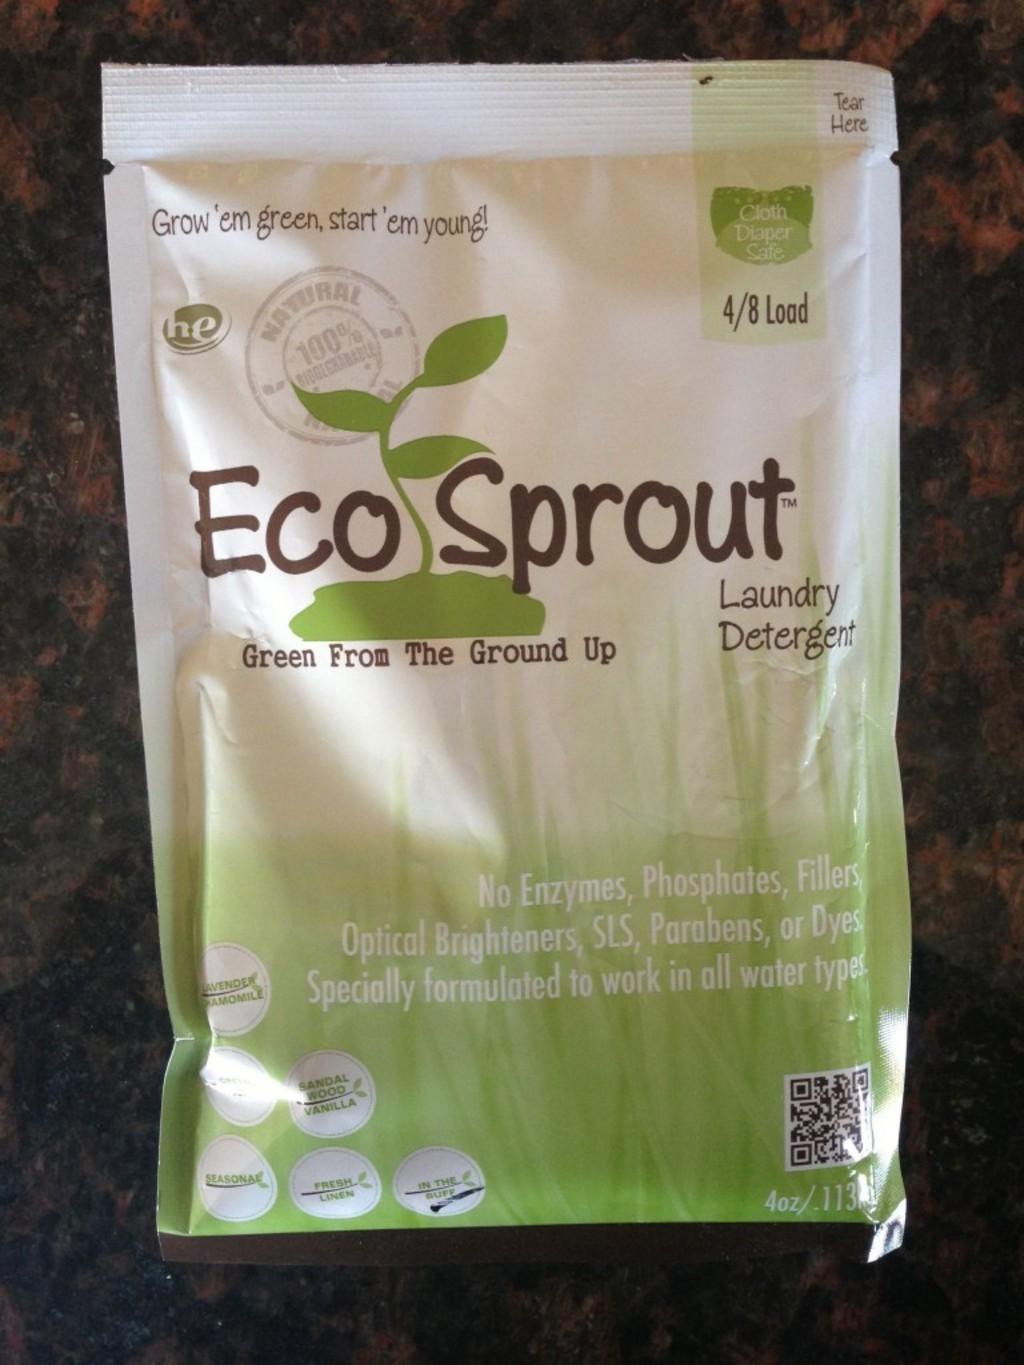 EcoSprout "Green from the Ground Up" Laundry Detergent Stork Stack